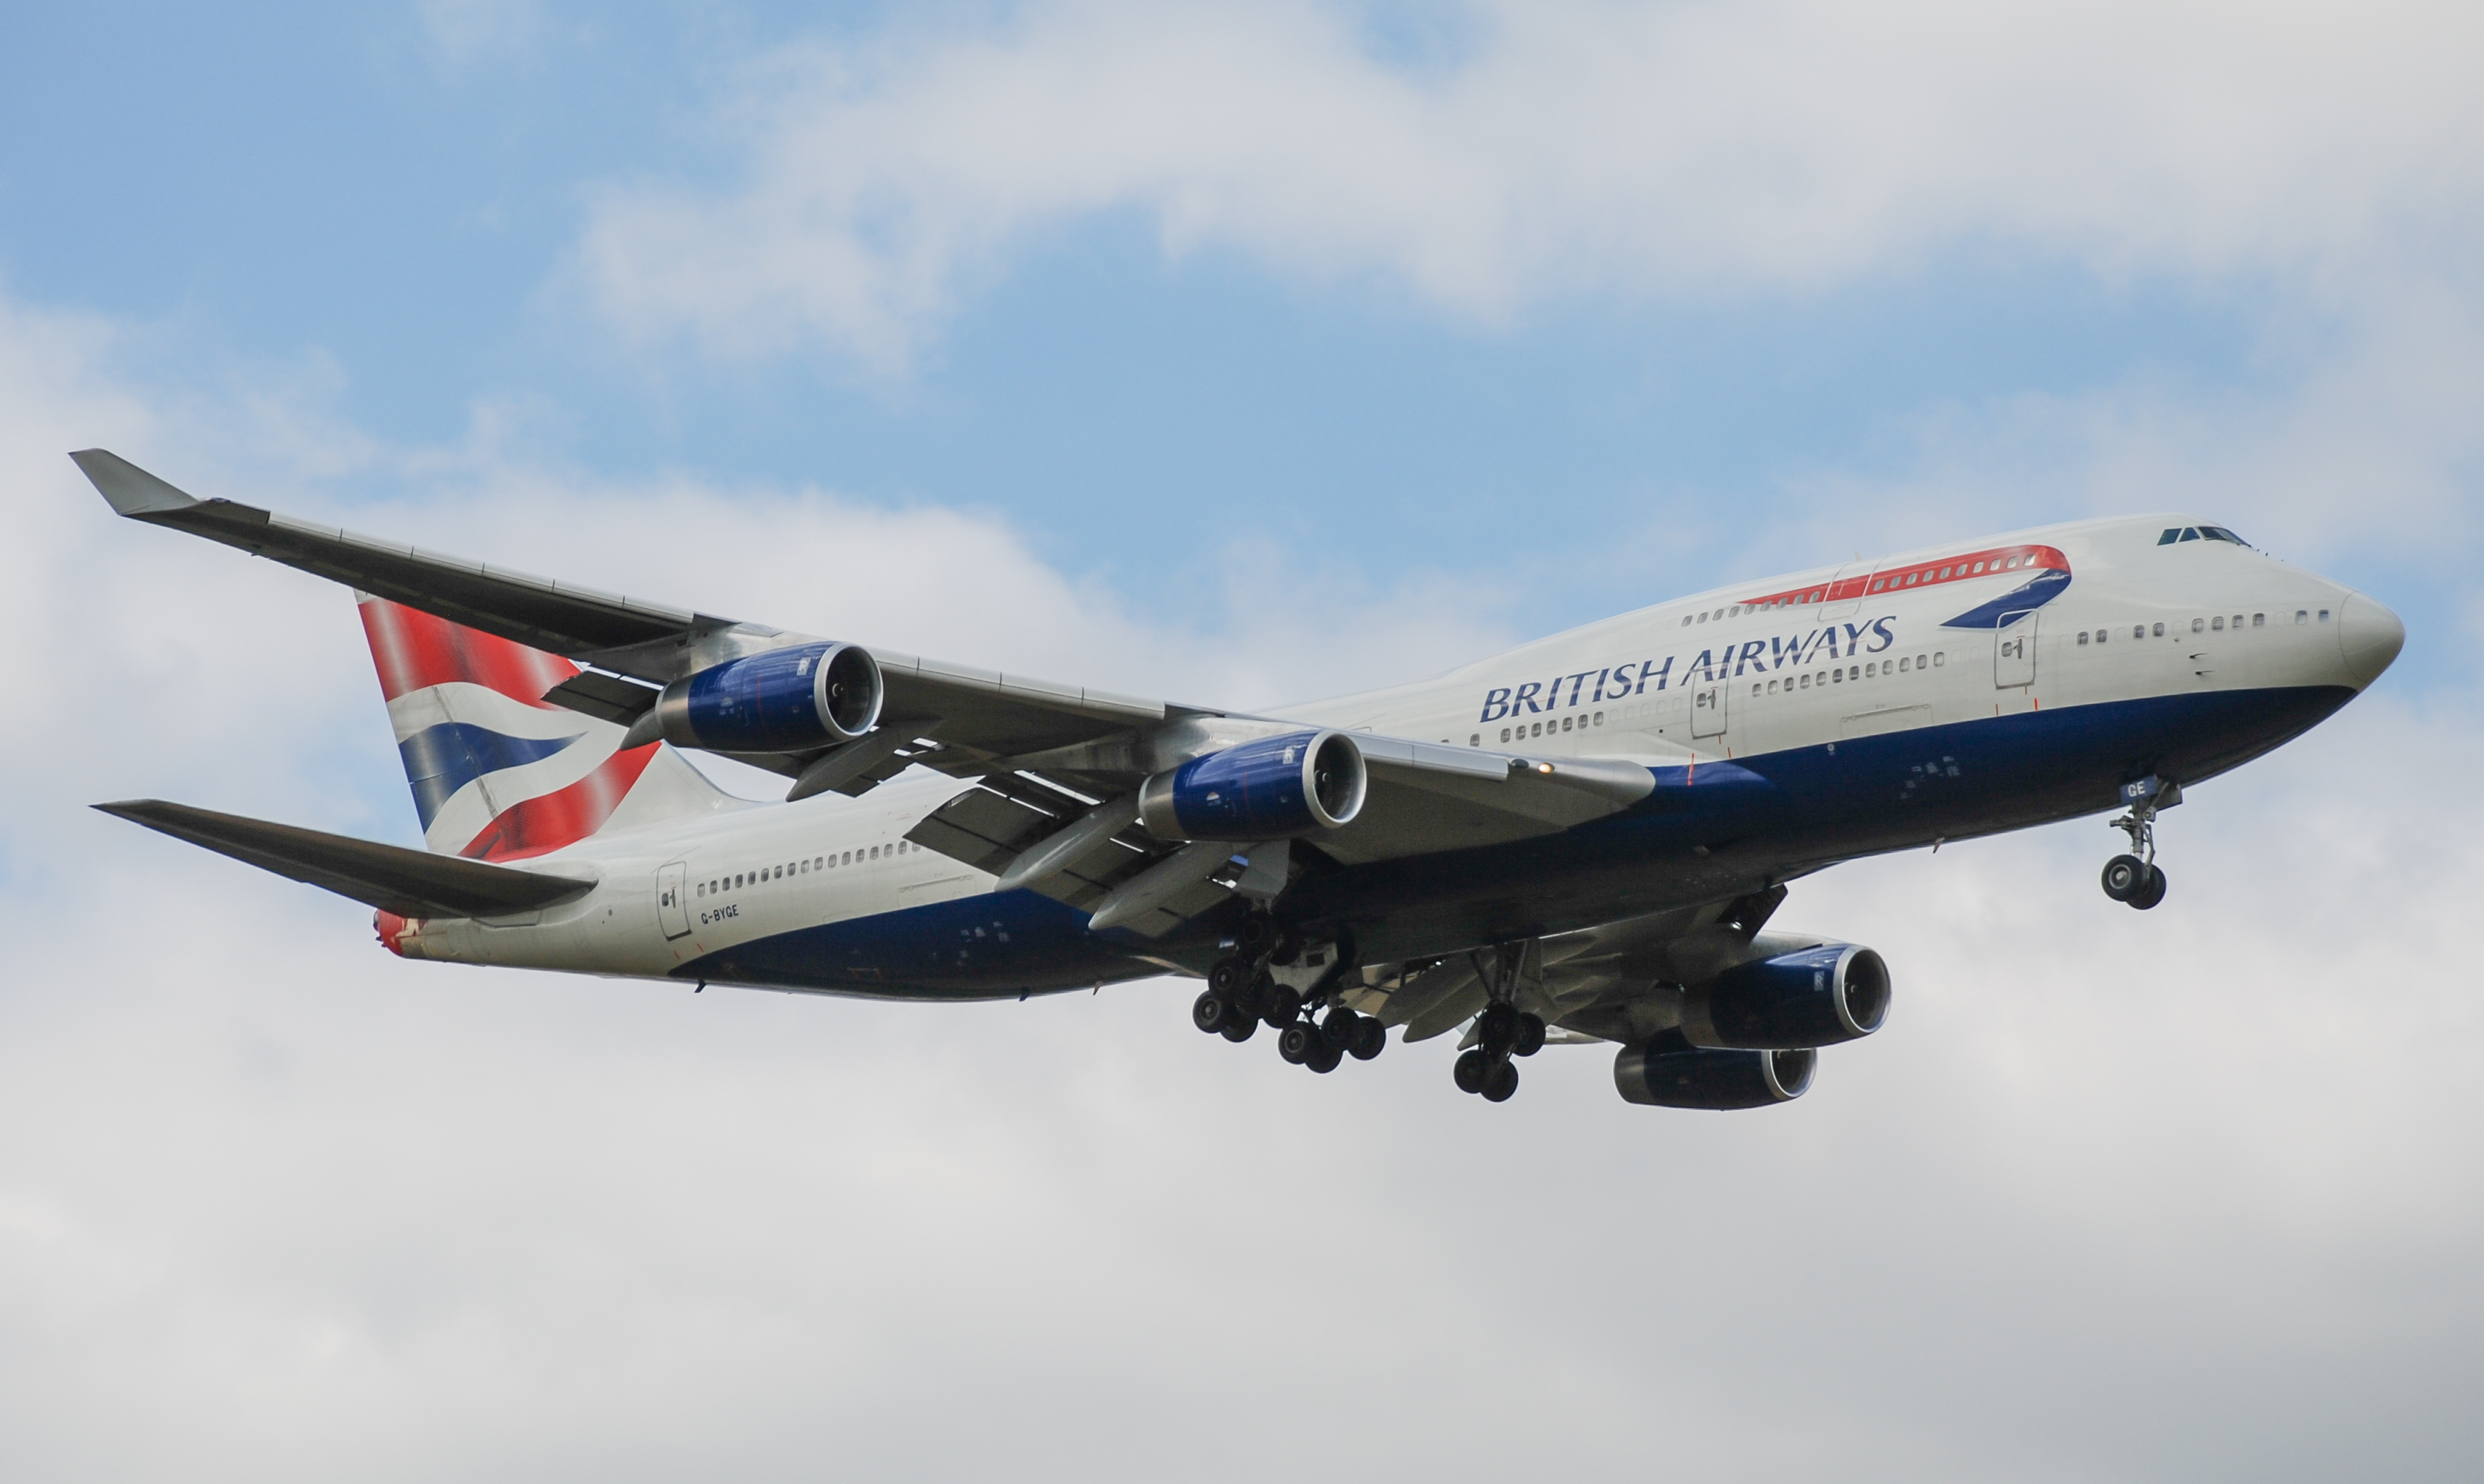 G-BYGE/GBYGE Withdrawn from use Boeing 747 Airframe Information - AVSpotters.com